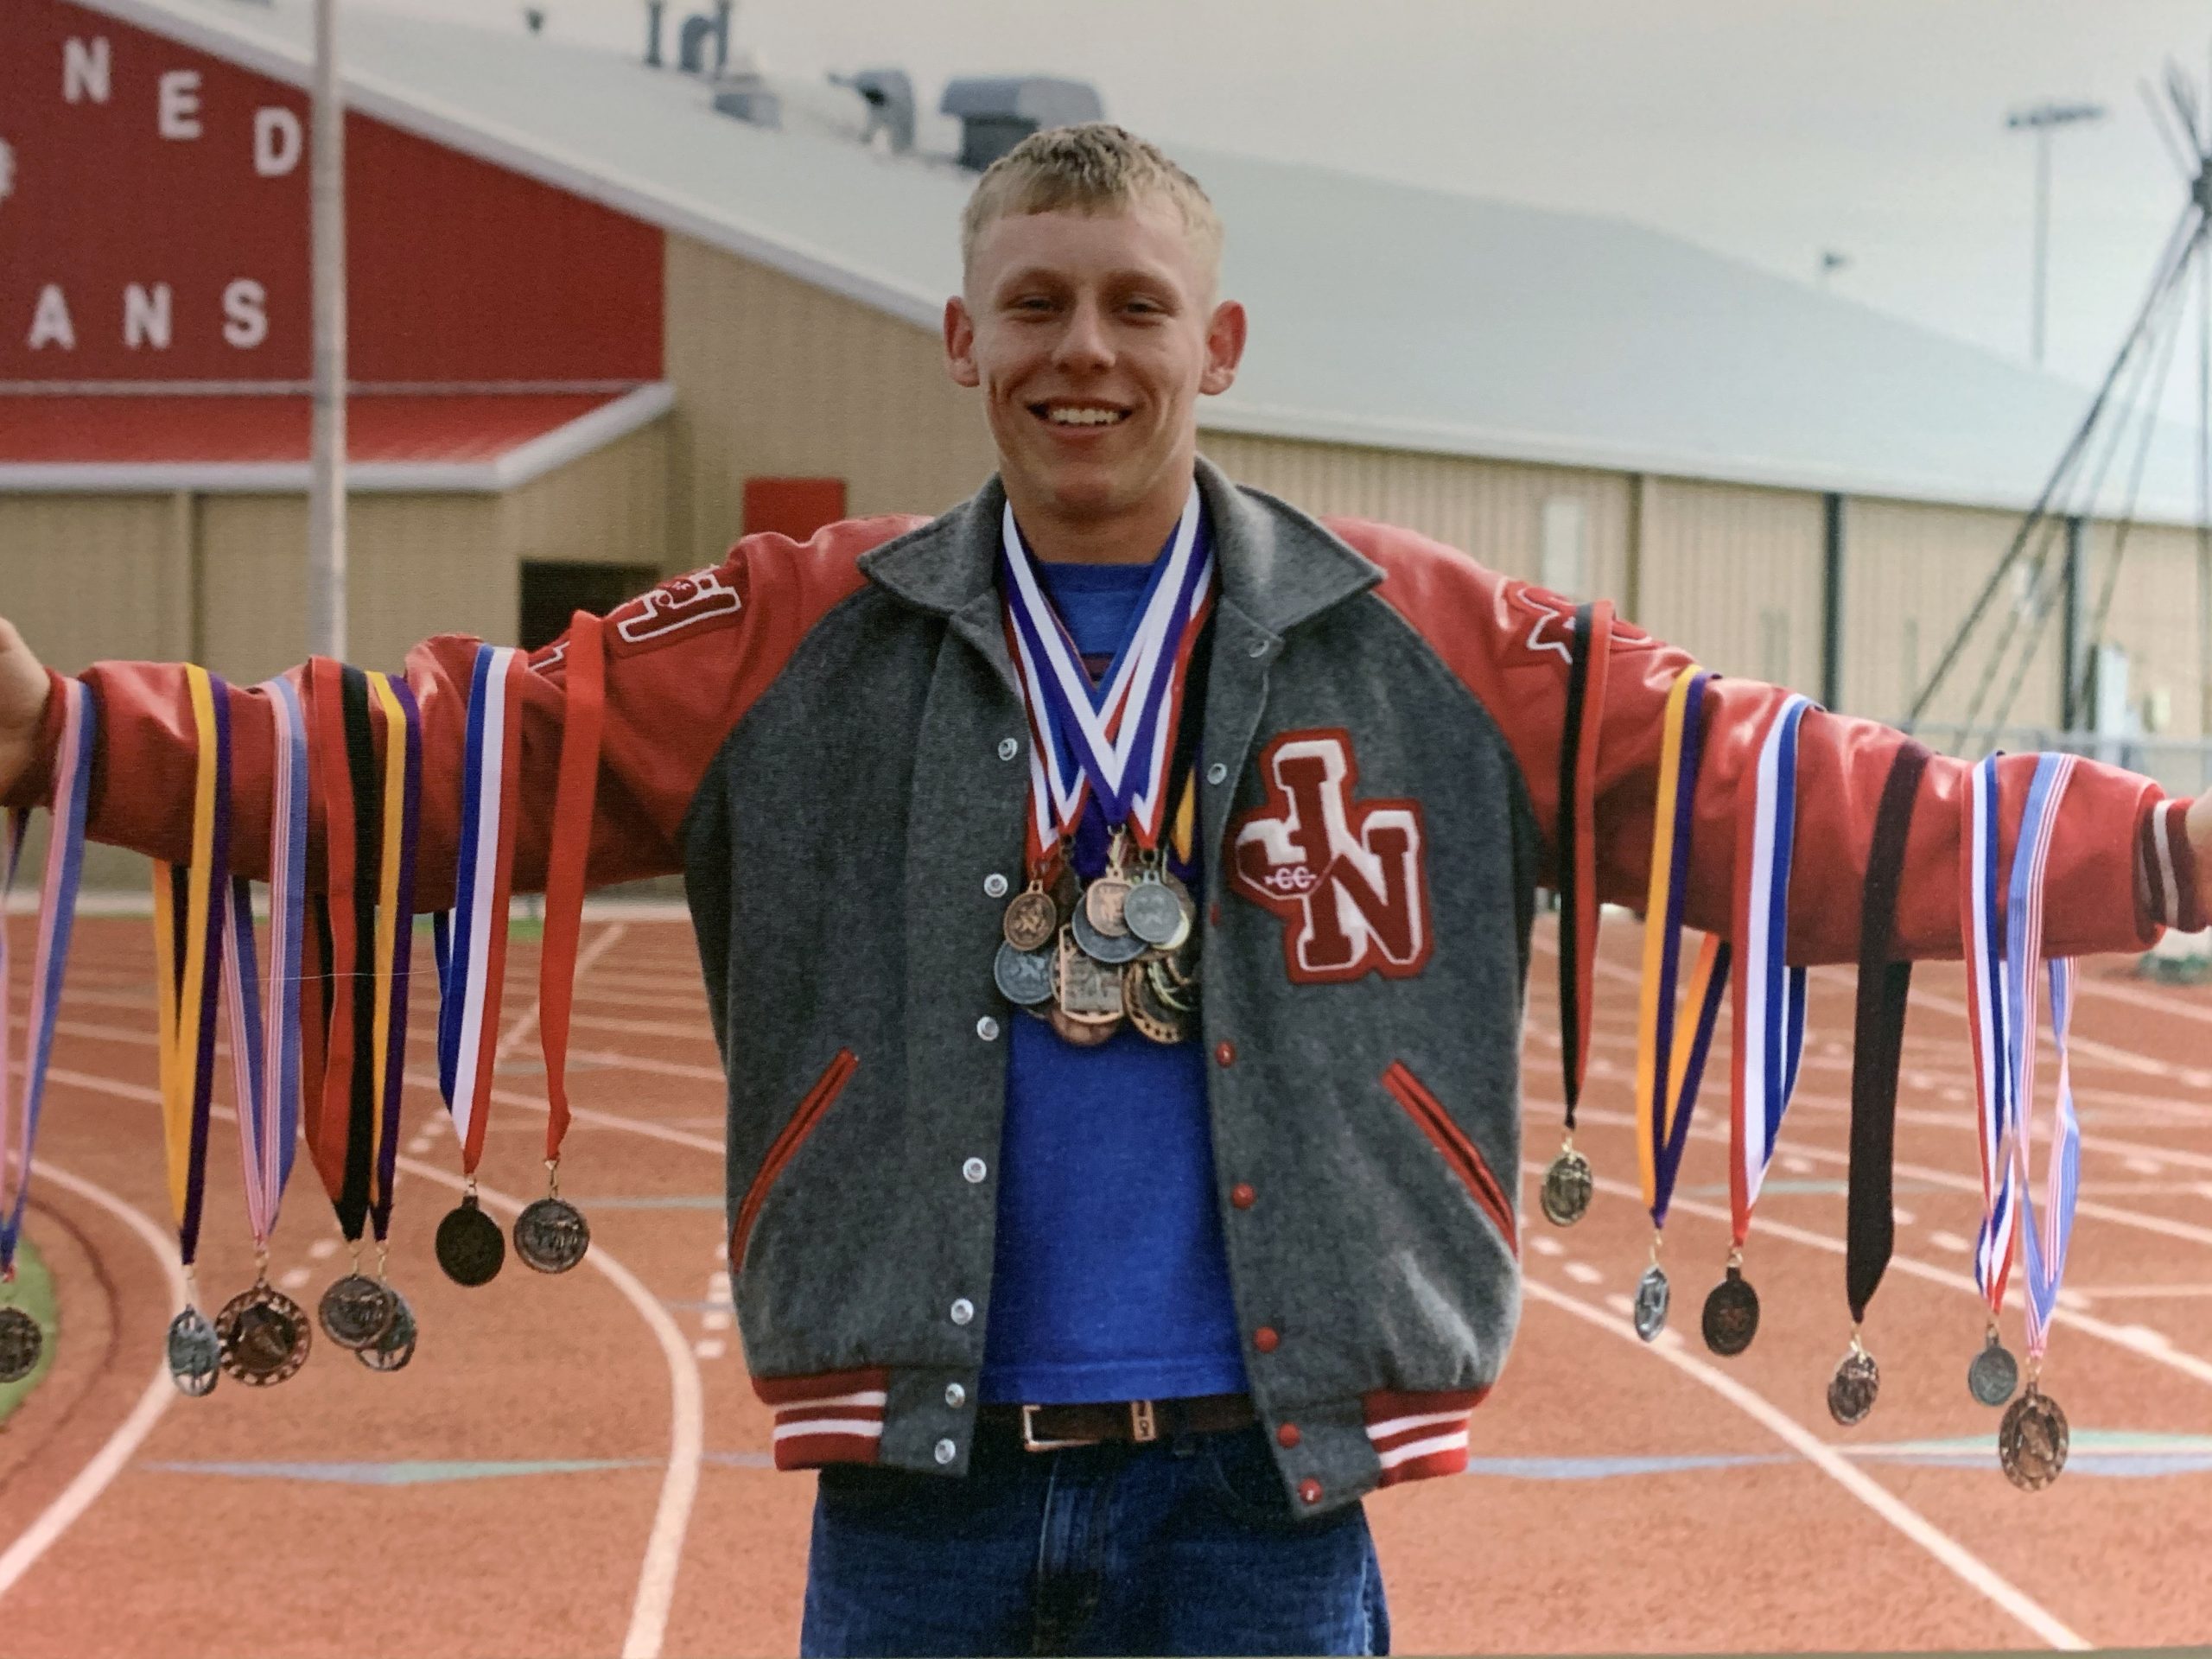 Young man with athletic jacket on with arms out holding athletic medals